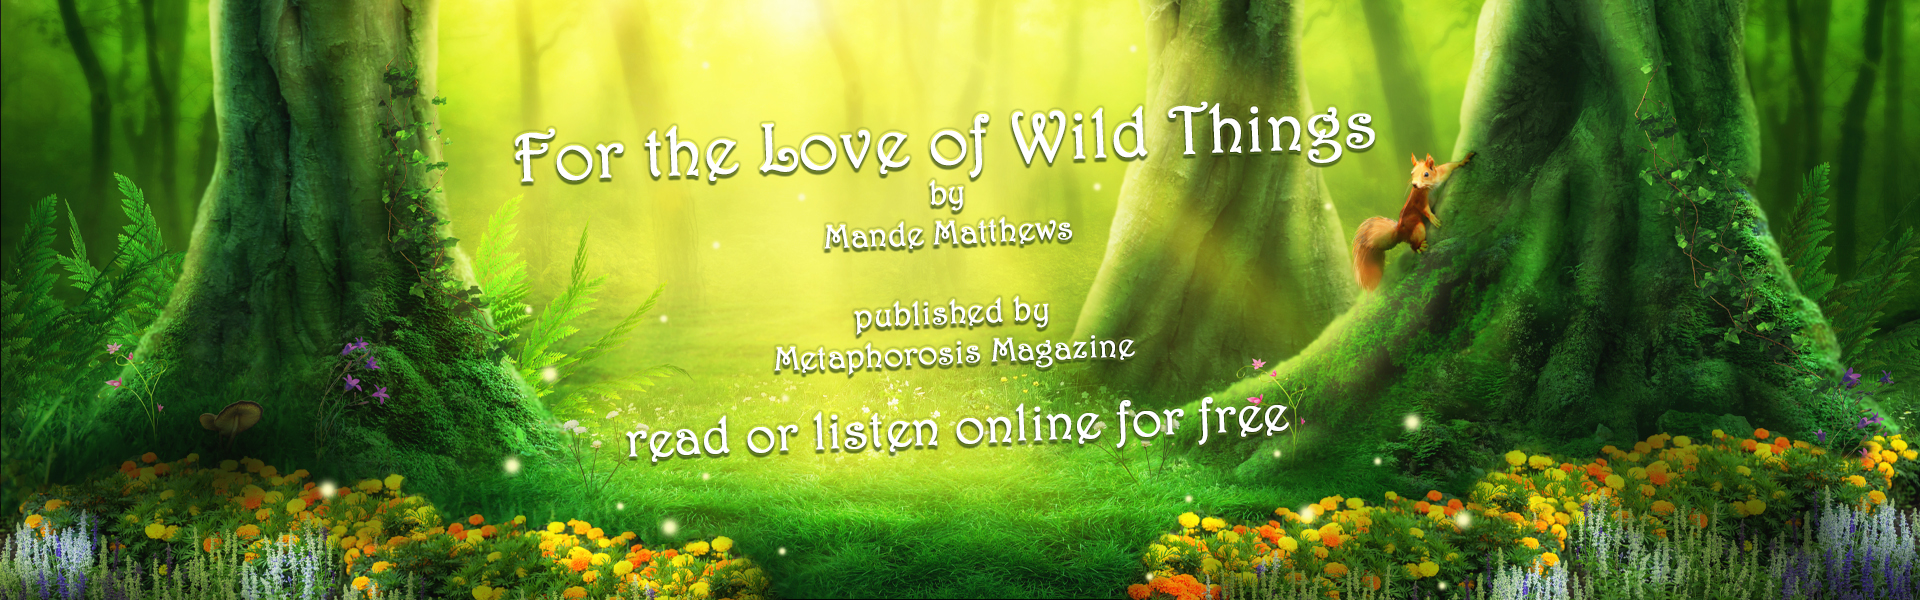 fantasy short stories, stories about nature, stories about animals, fabulist stories, magical realism, read for free, free audiobook fantasy stories